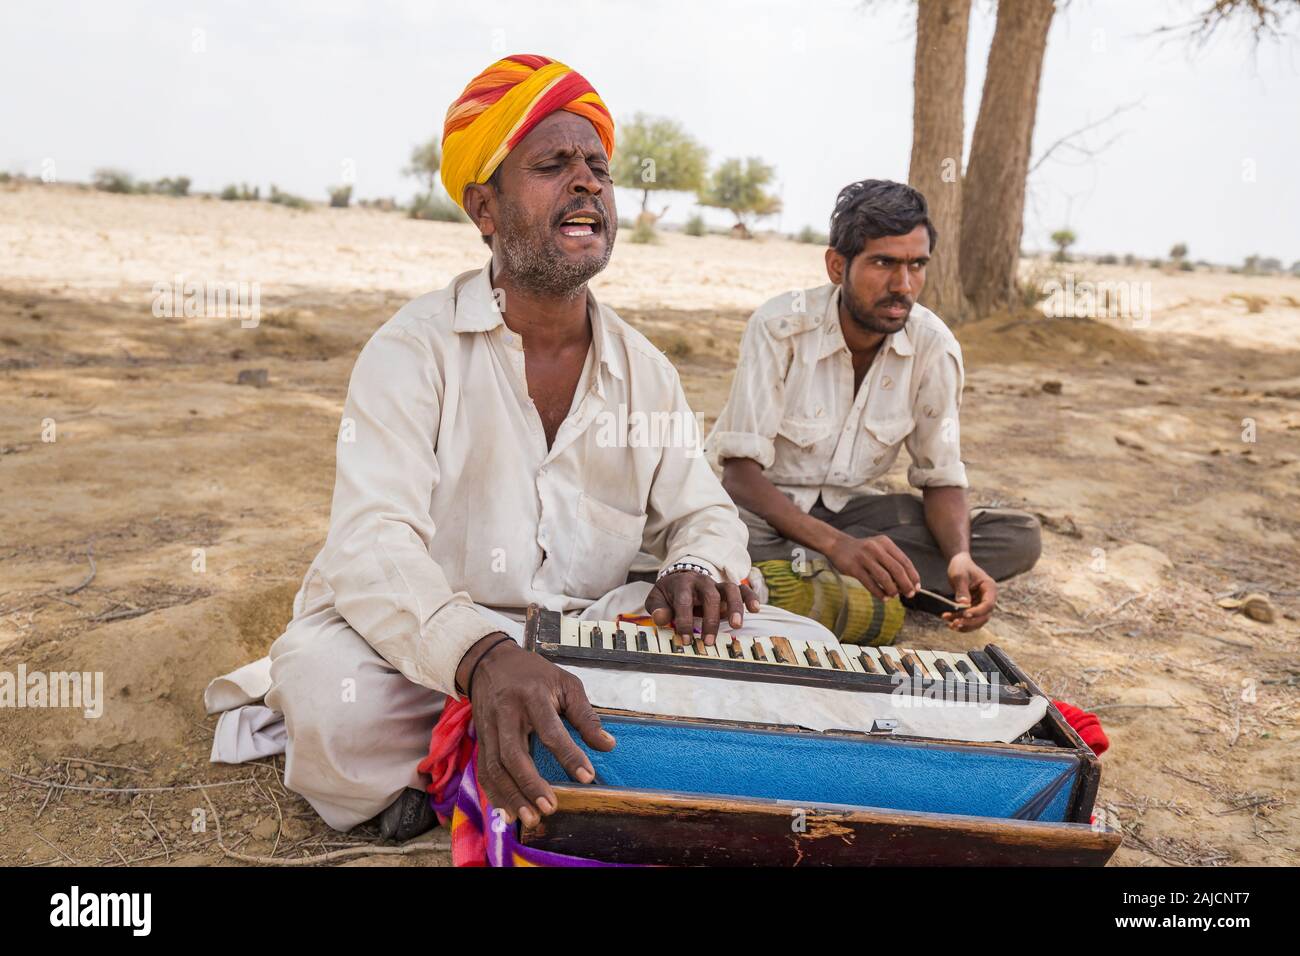 Jaisalmer, India - March 09 2017: A man plays a musical instrument and sings in the desert. Stock Photo